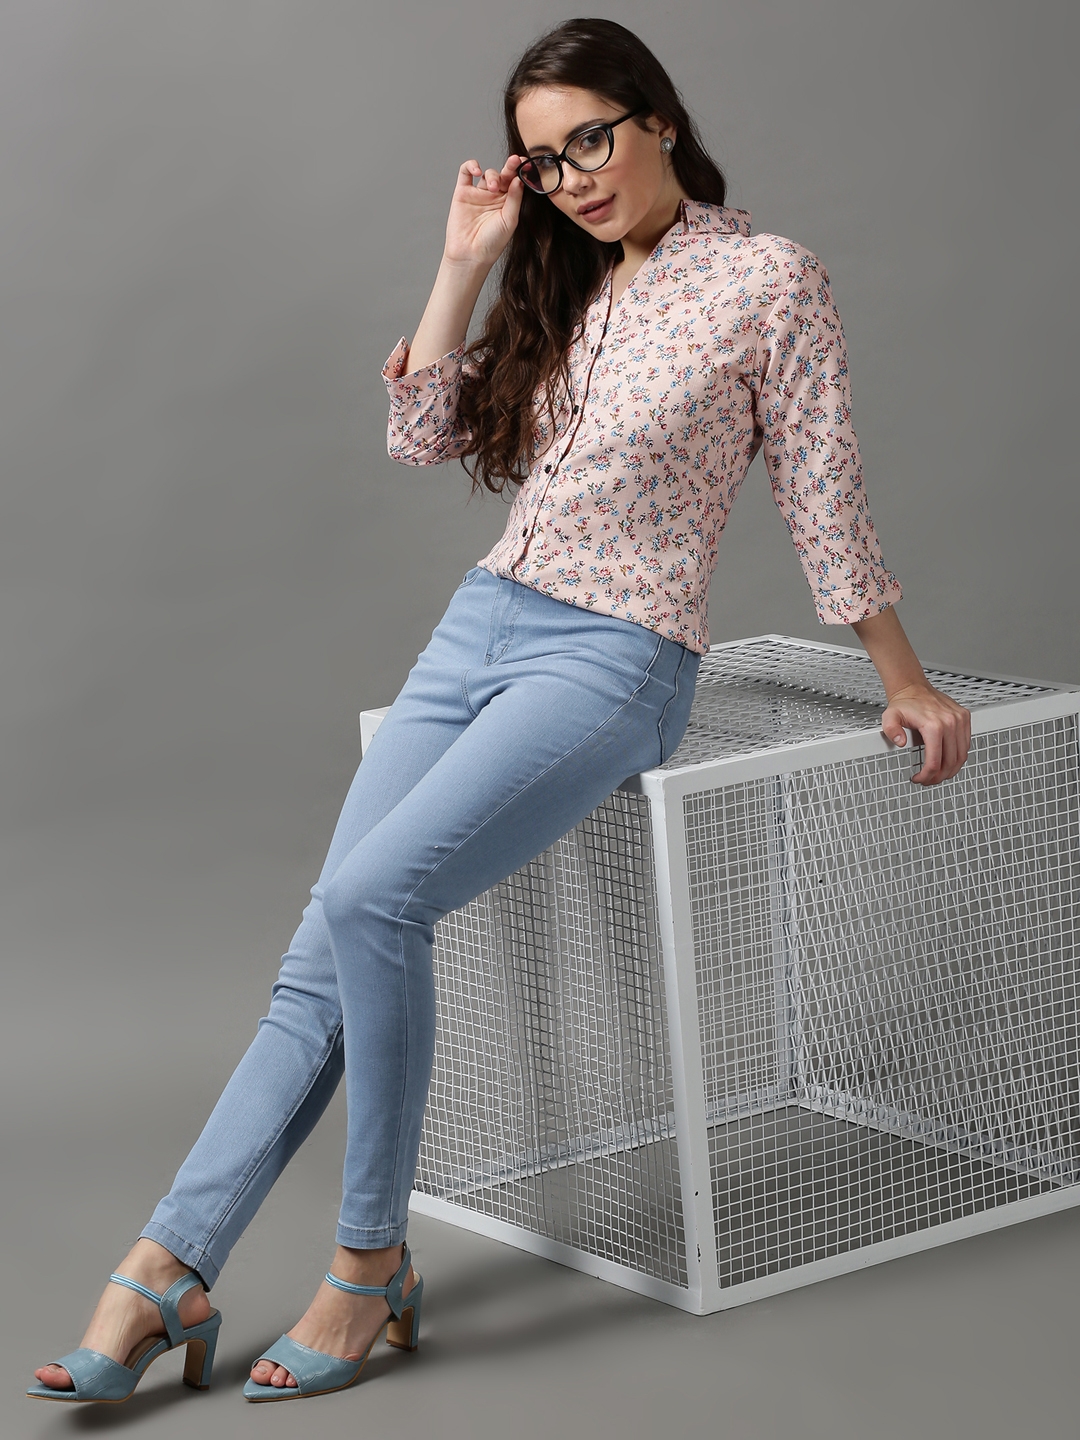 Women's Pink Polyester Printed Casual Shirts